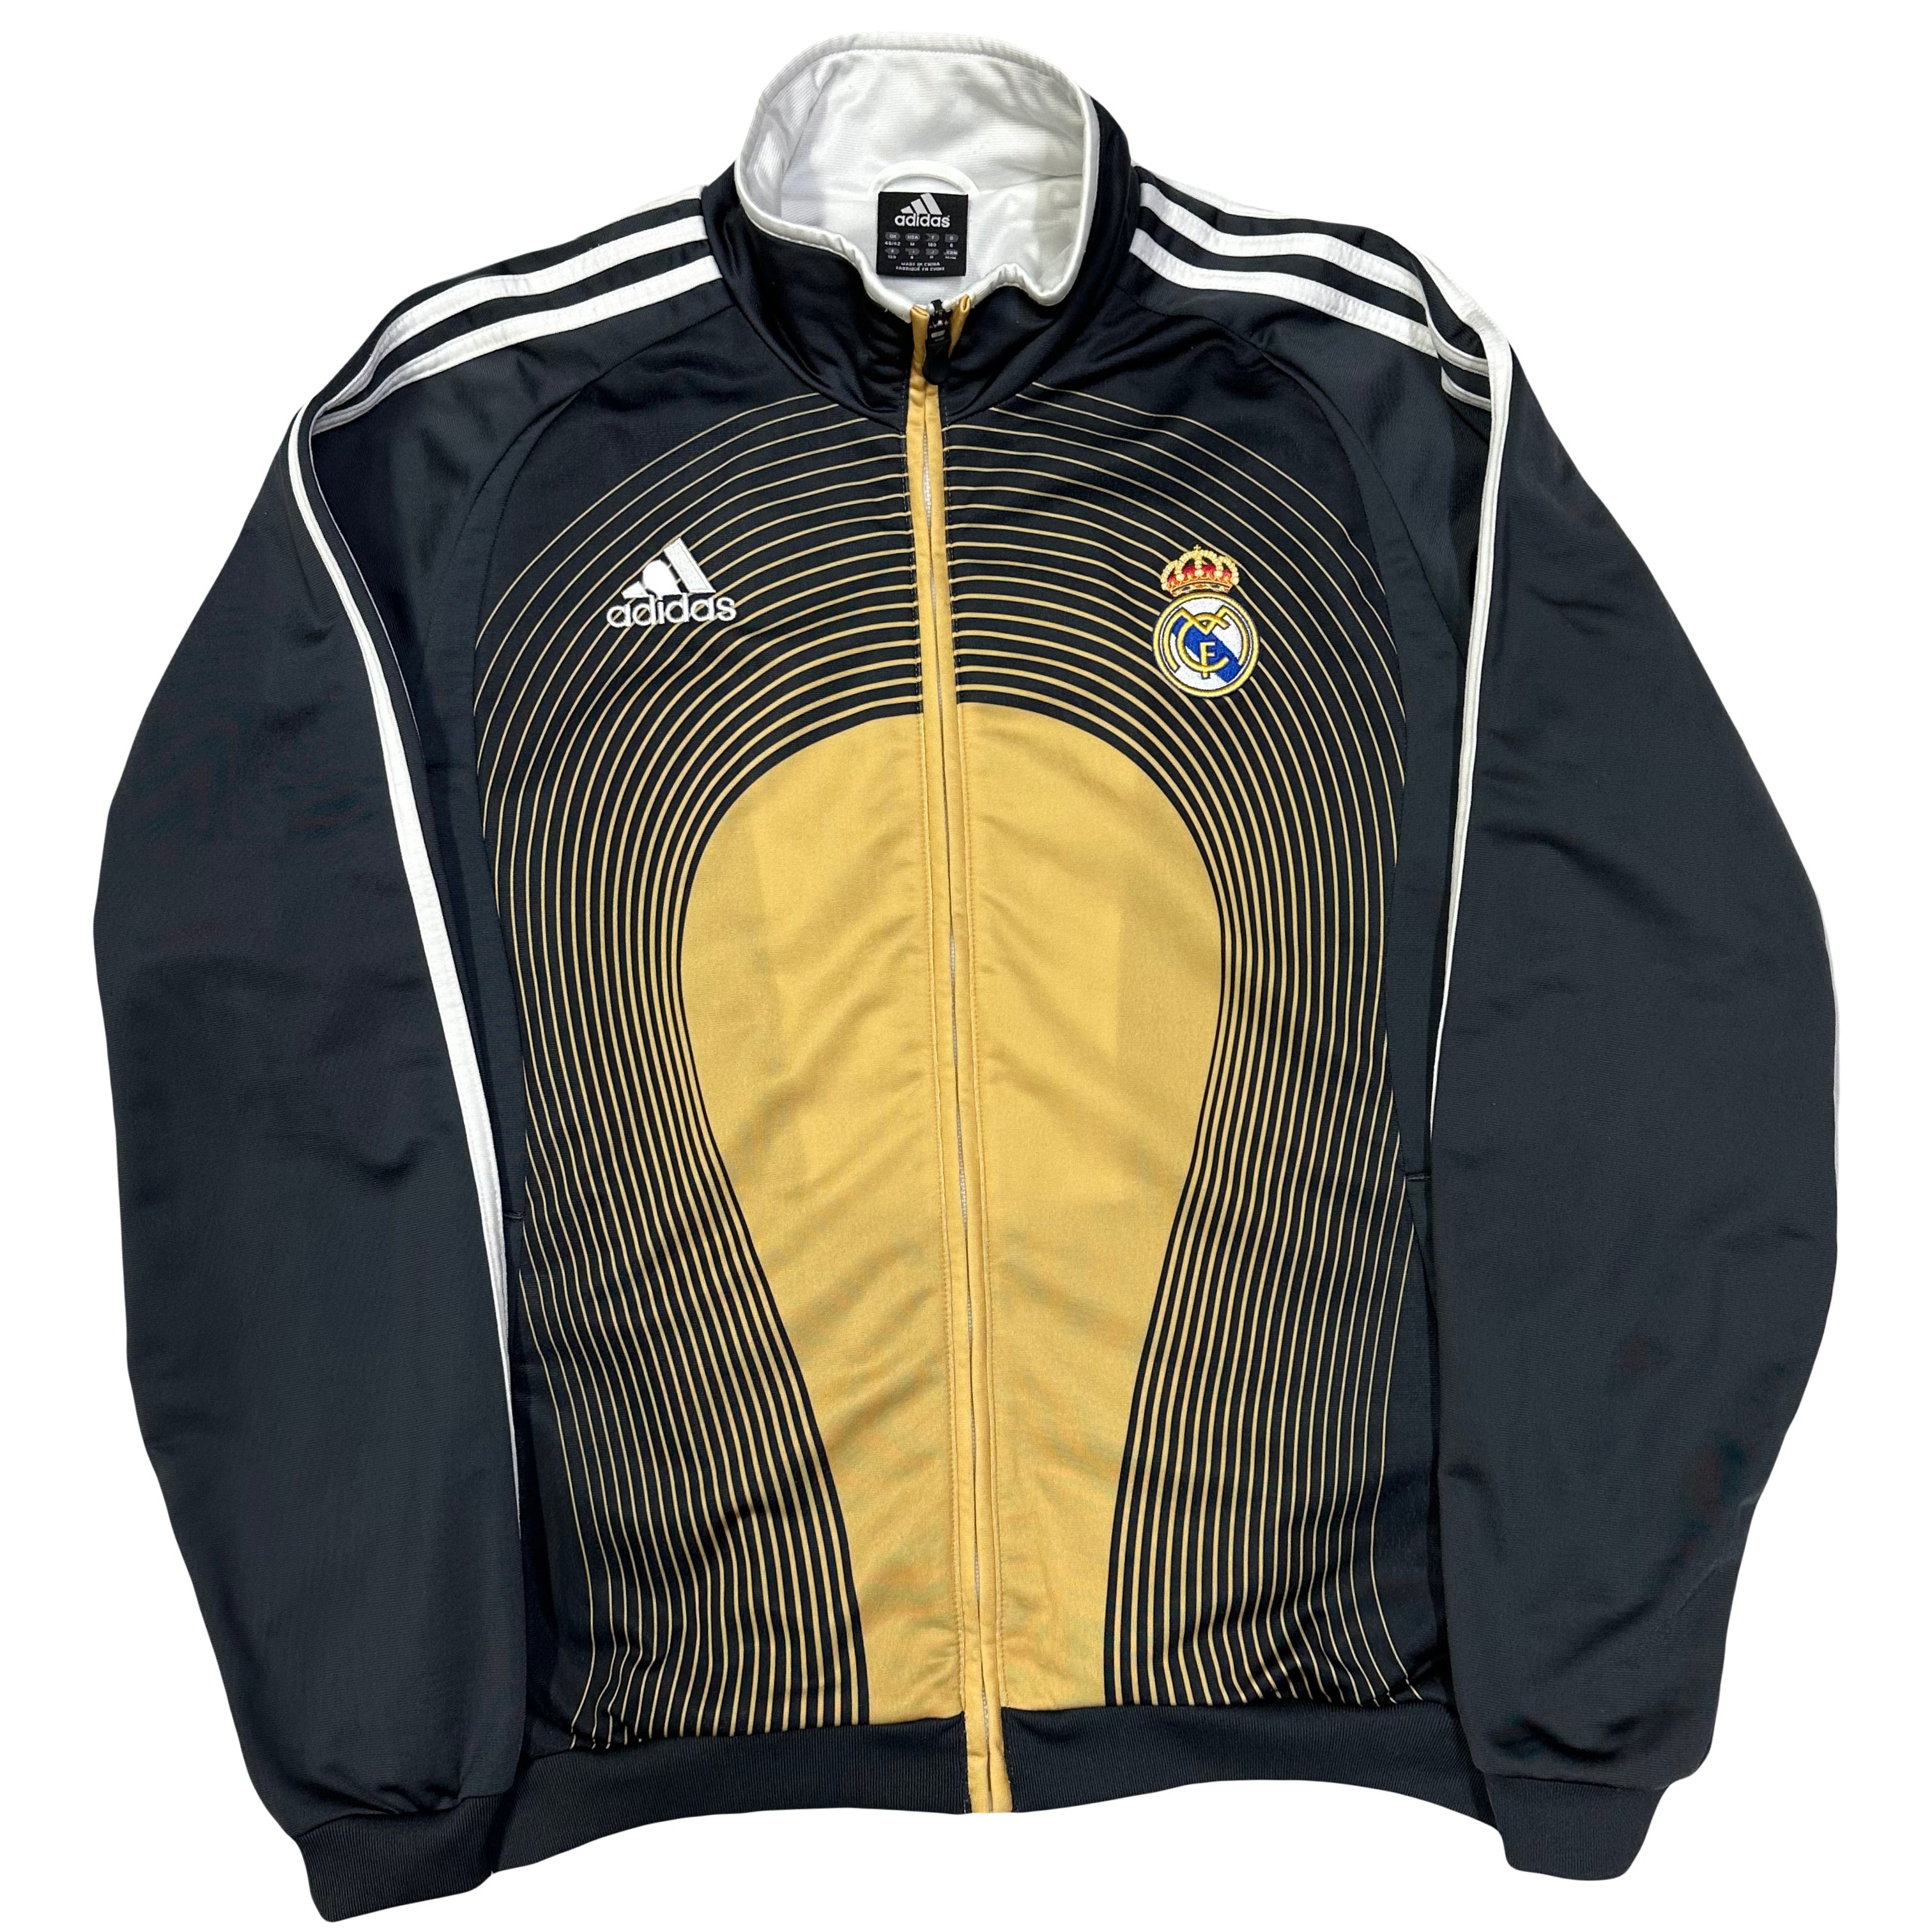 Adidas 2006/07 Real Madrid Tracksuit Top In Black ( M )